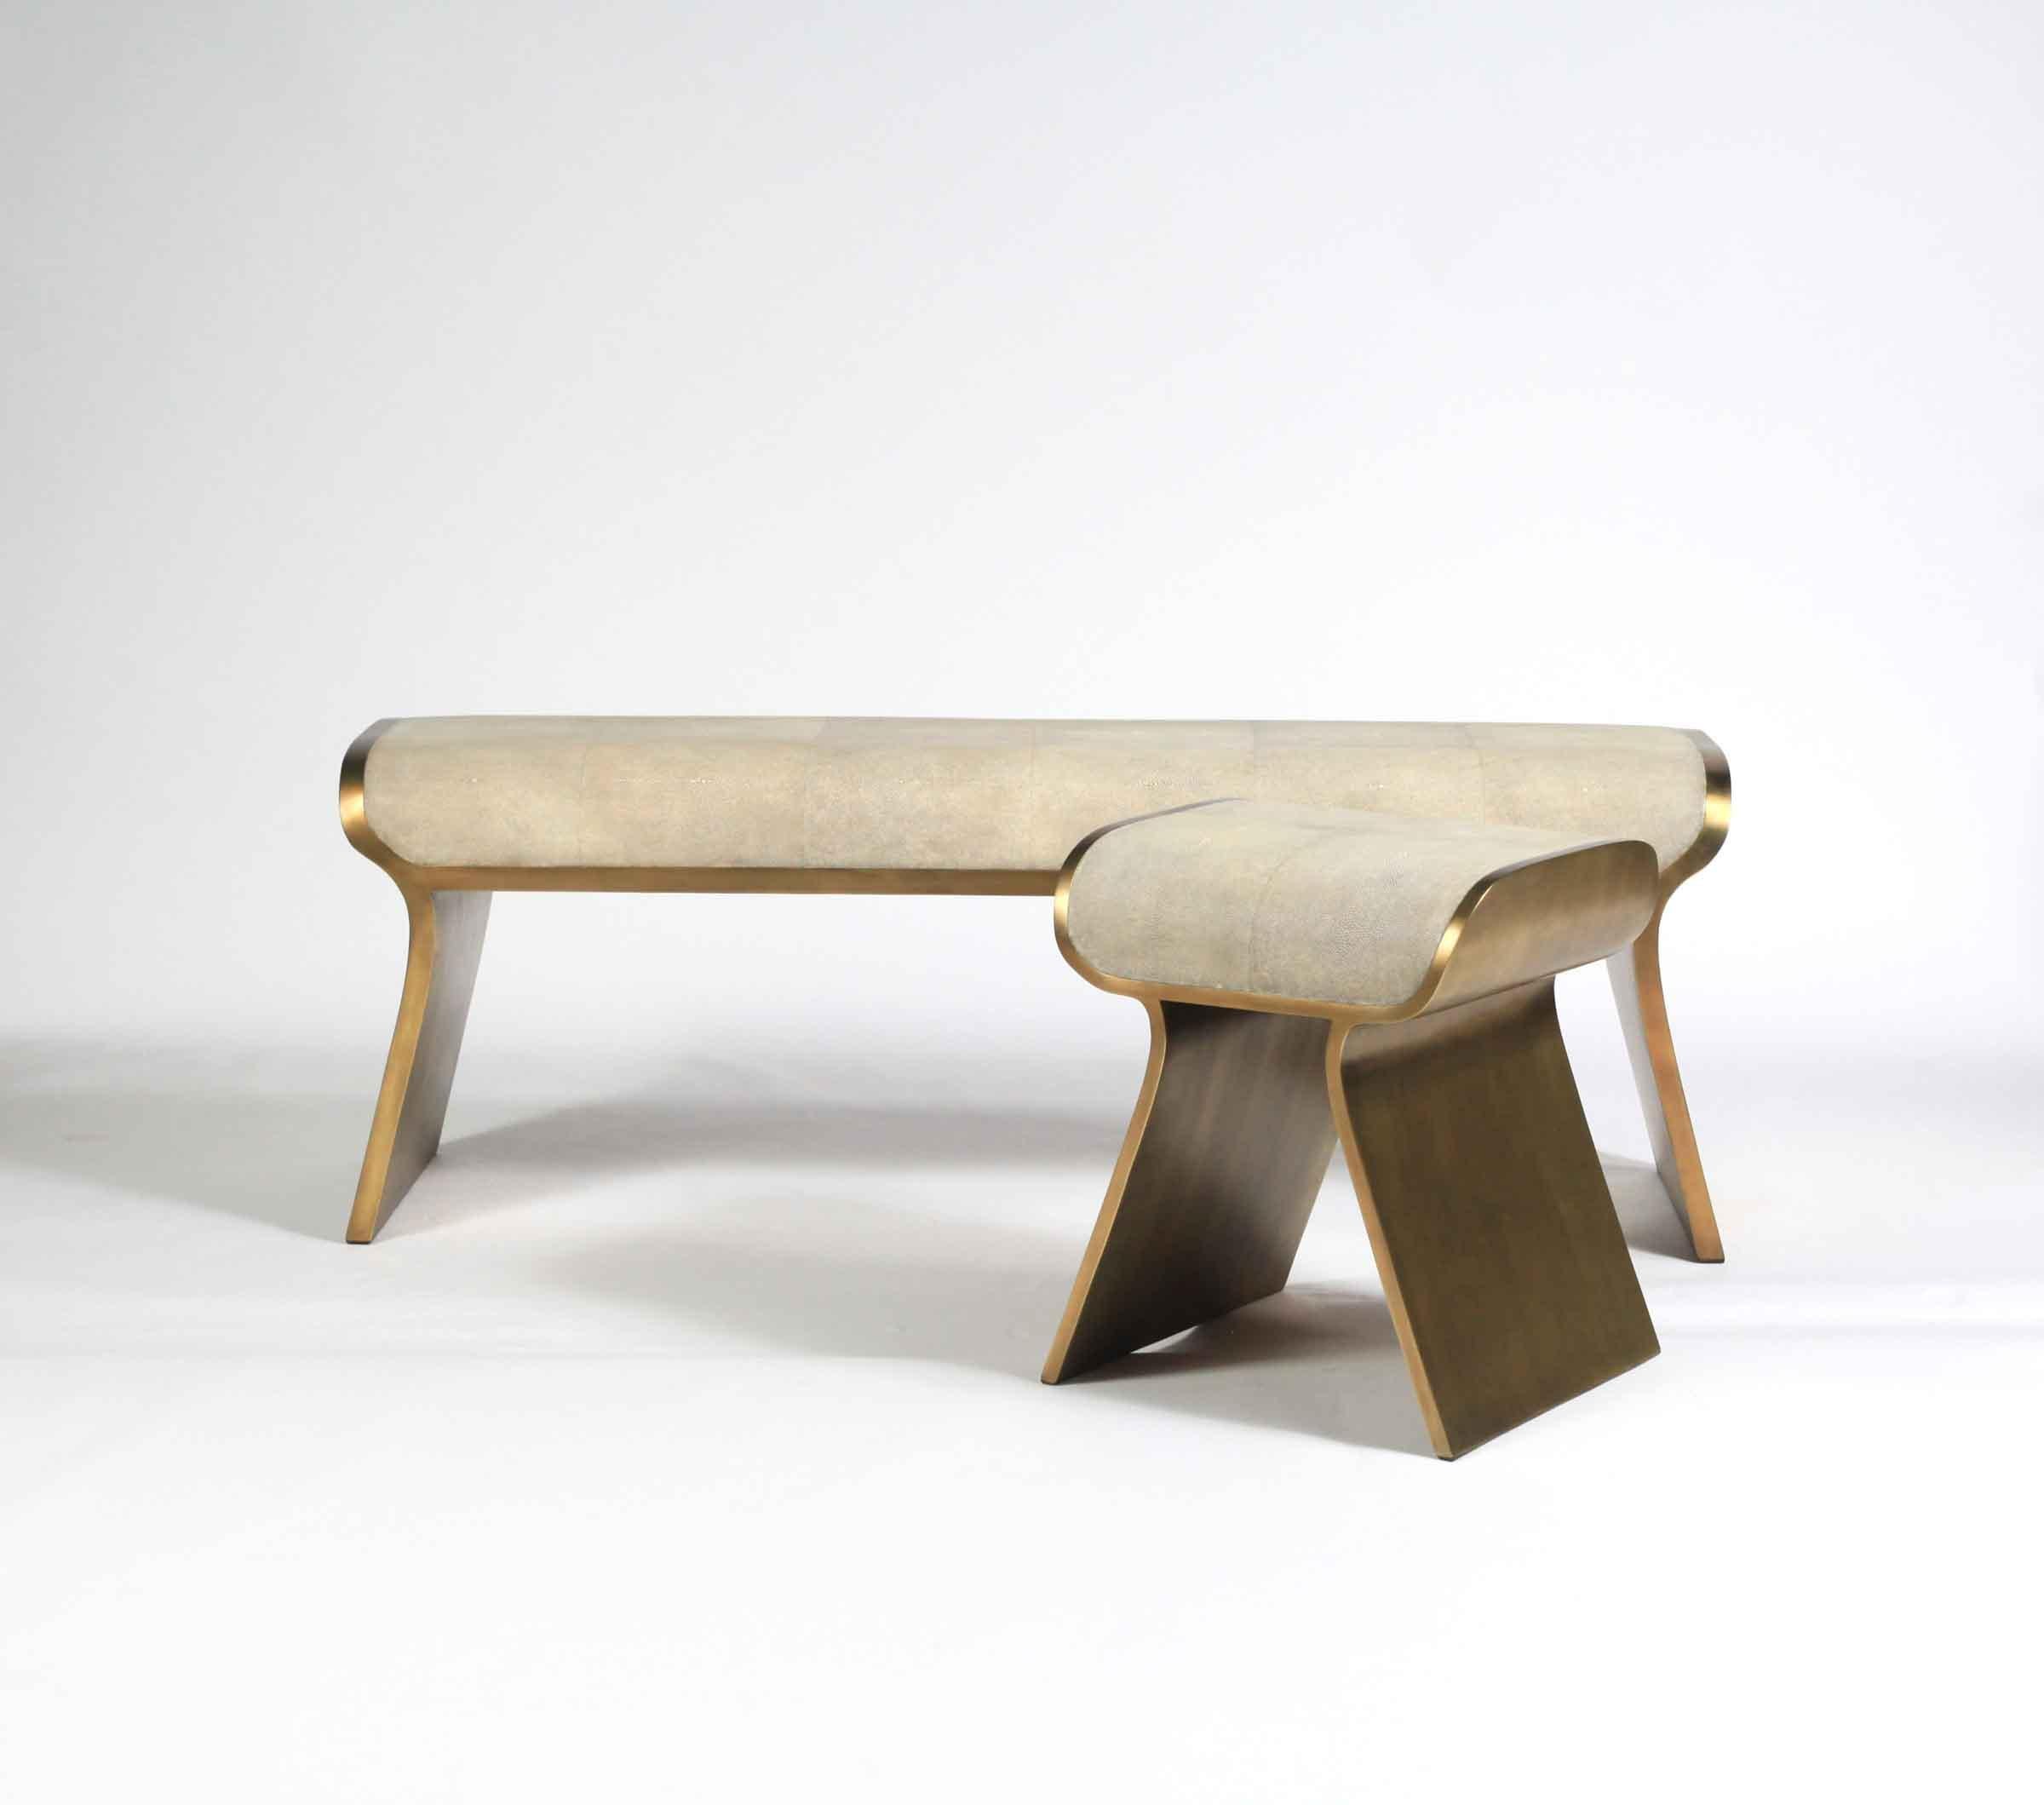 Hand-Crafted Dandy Stool Upholstered in Cream Fur & Bronze-Patina Brass Details by Kifu Paris For Sale